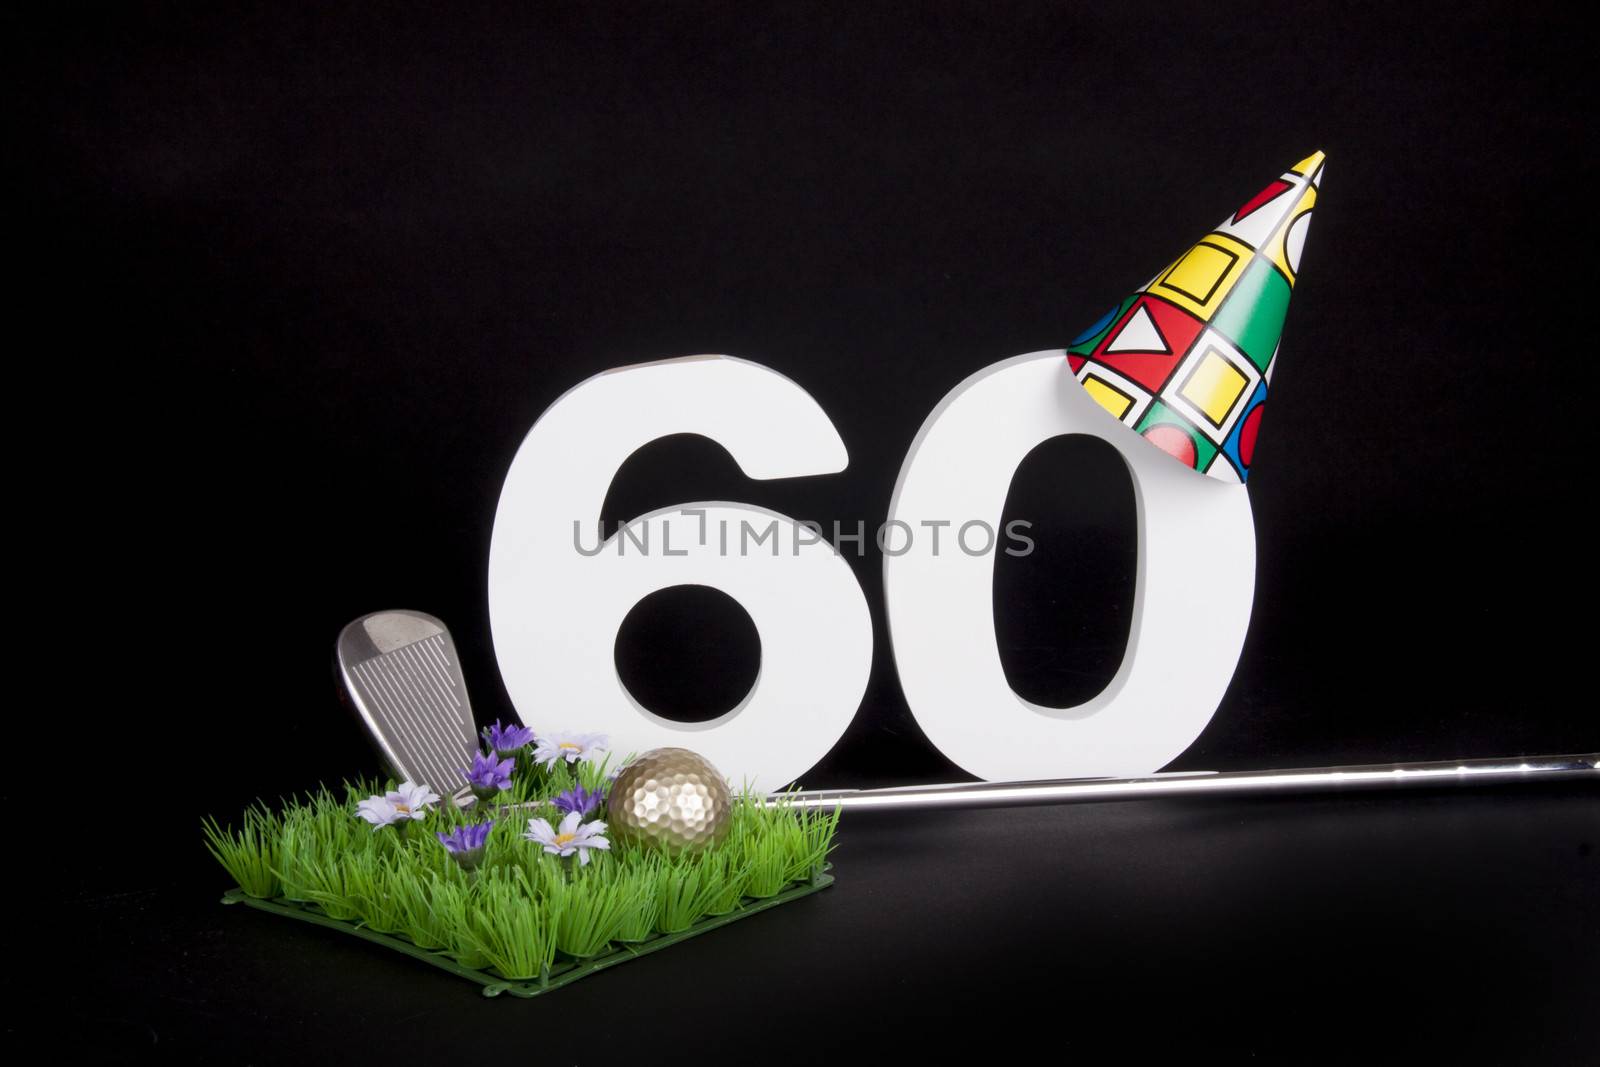 A golf club and golf ball on an artificial peace of grass to be used as a birthday card